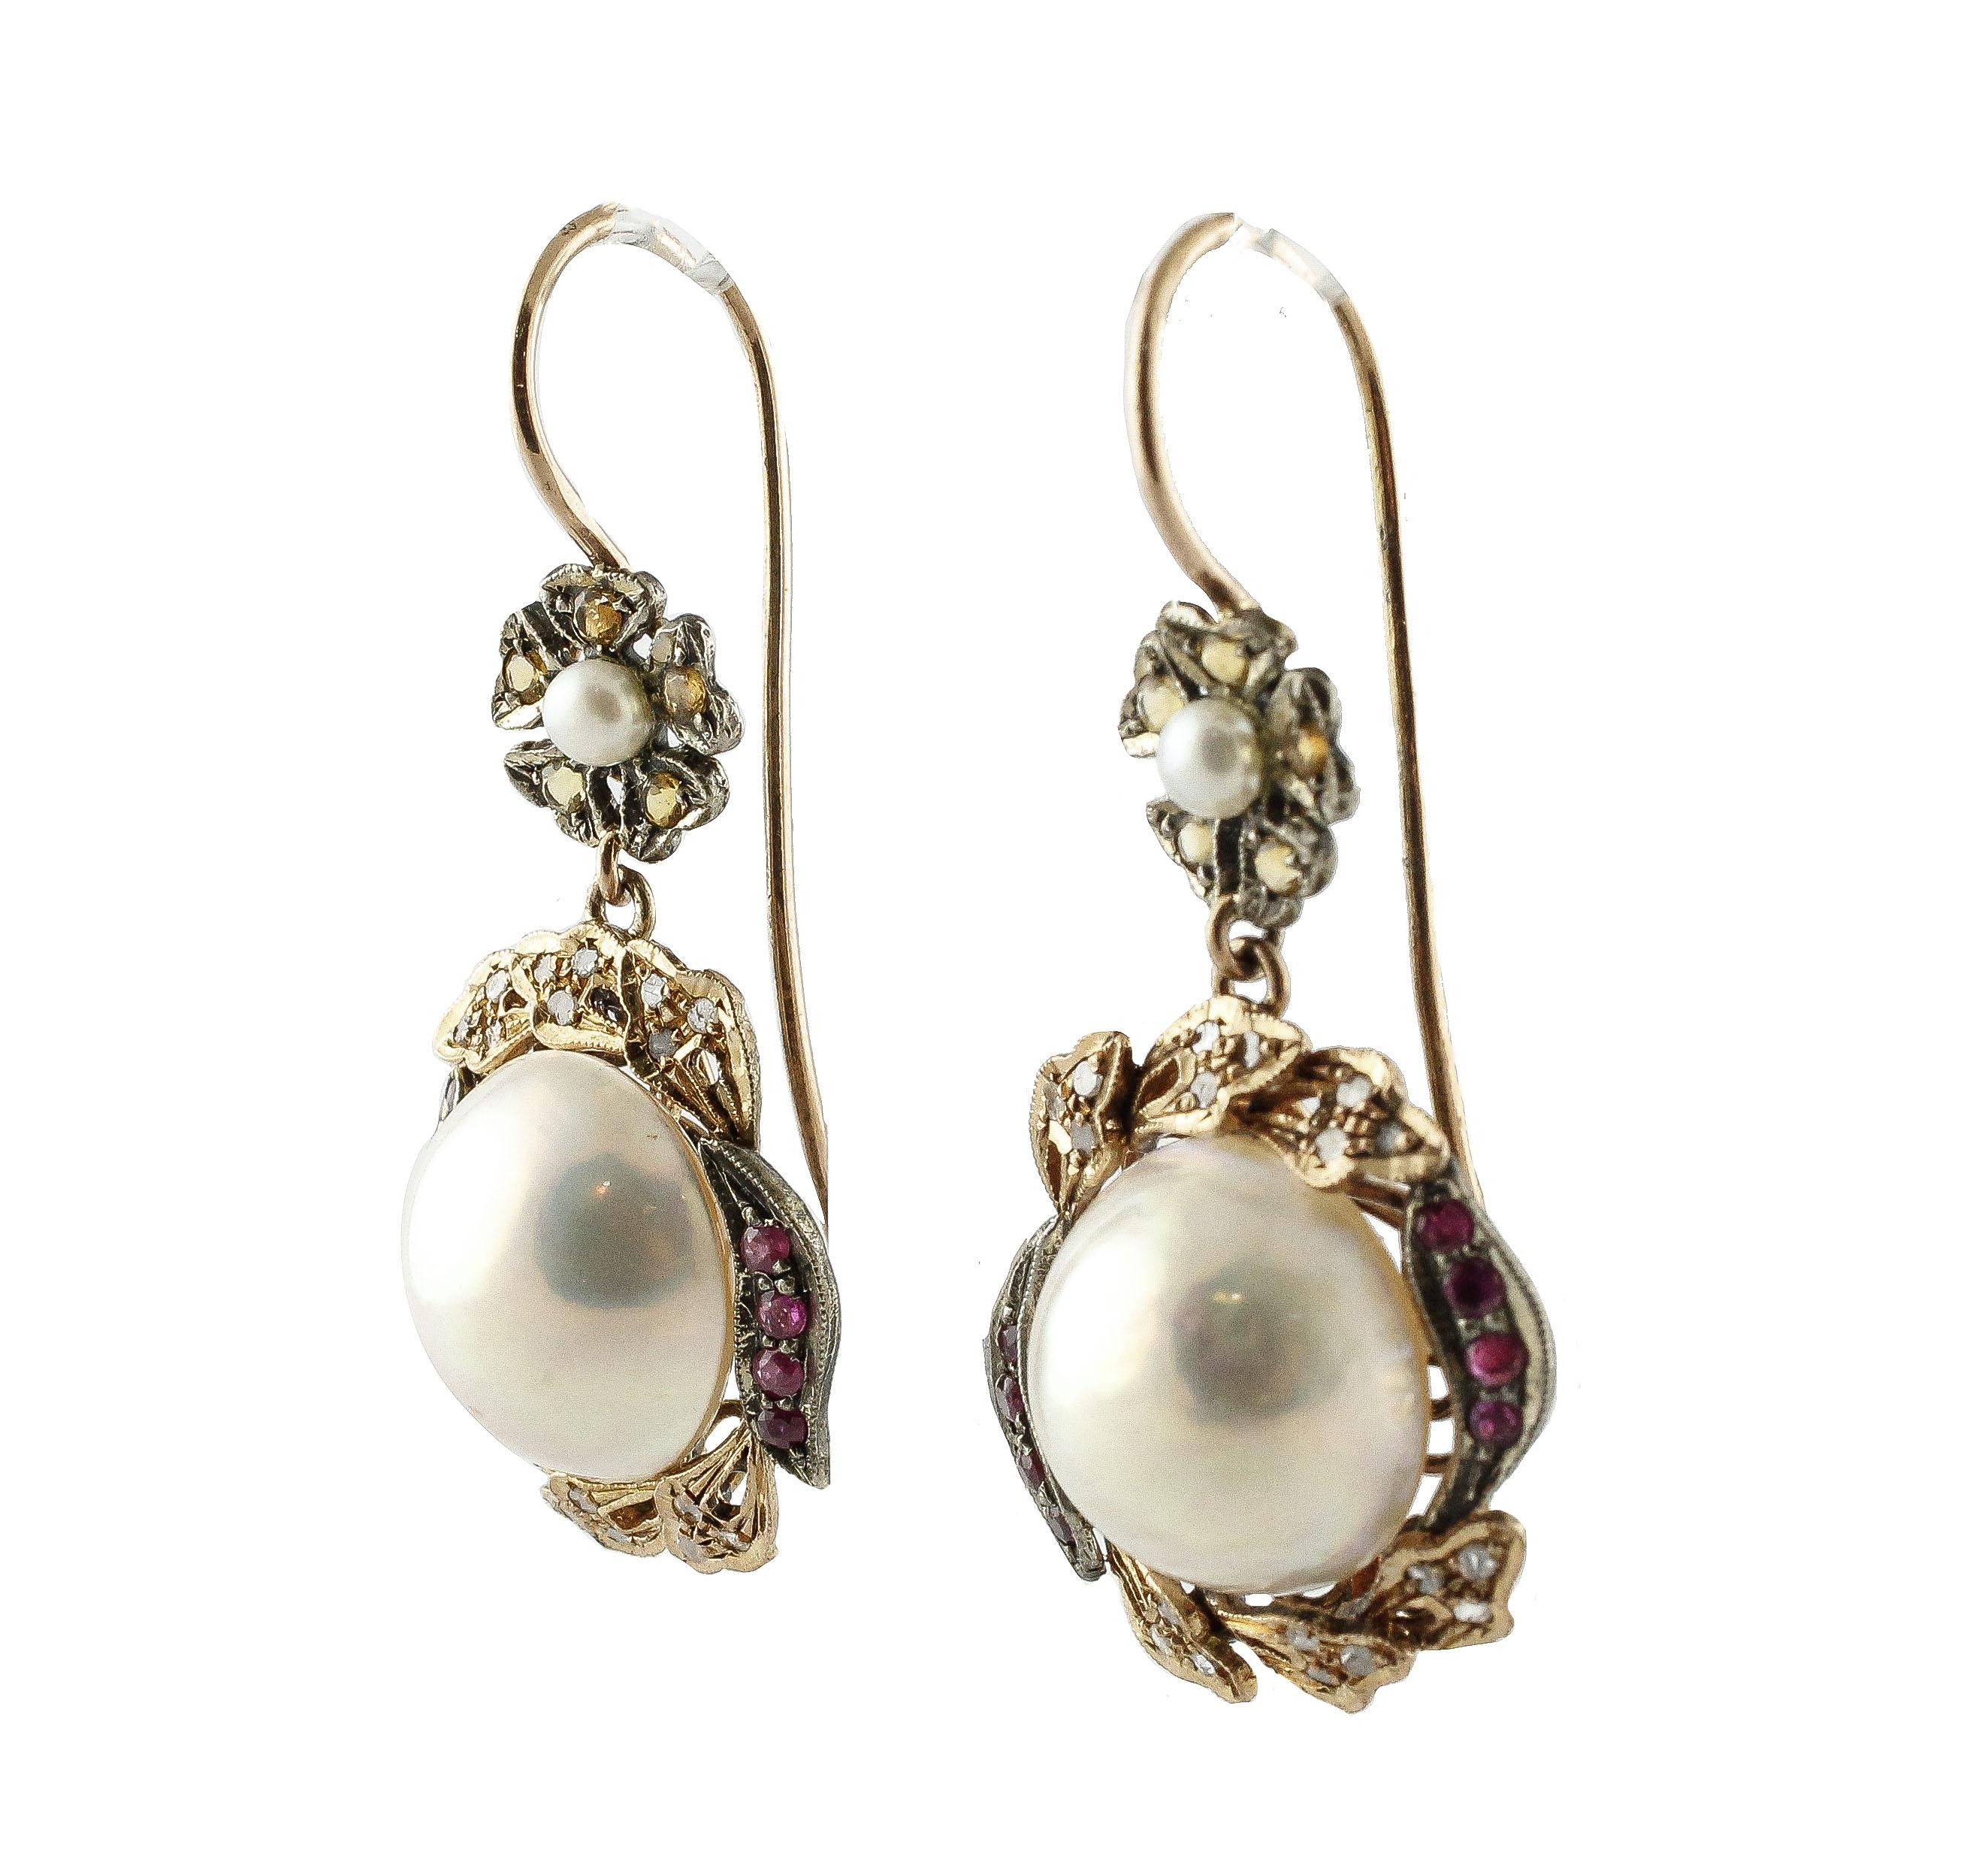 Diamonds Rubies Yellow Sapphires Pearls Rose Gold and Silver Earrings (Retro)